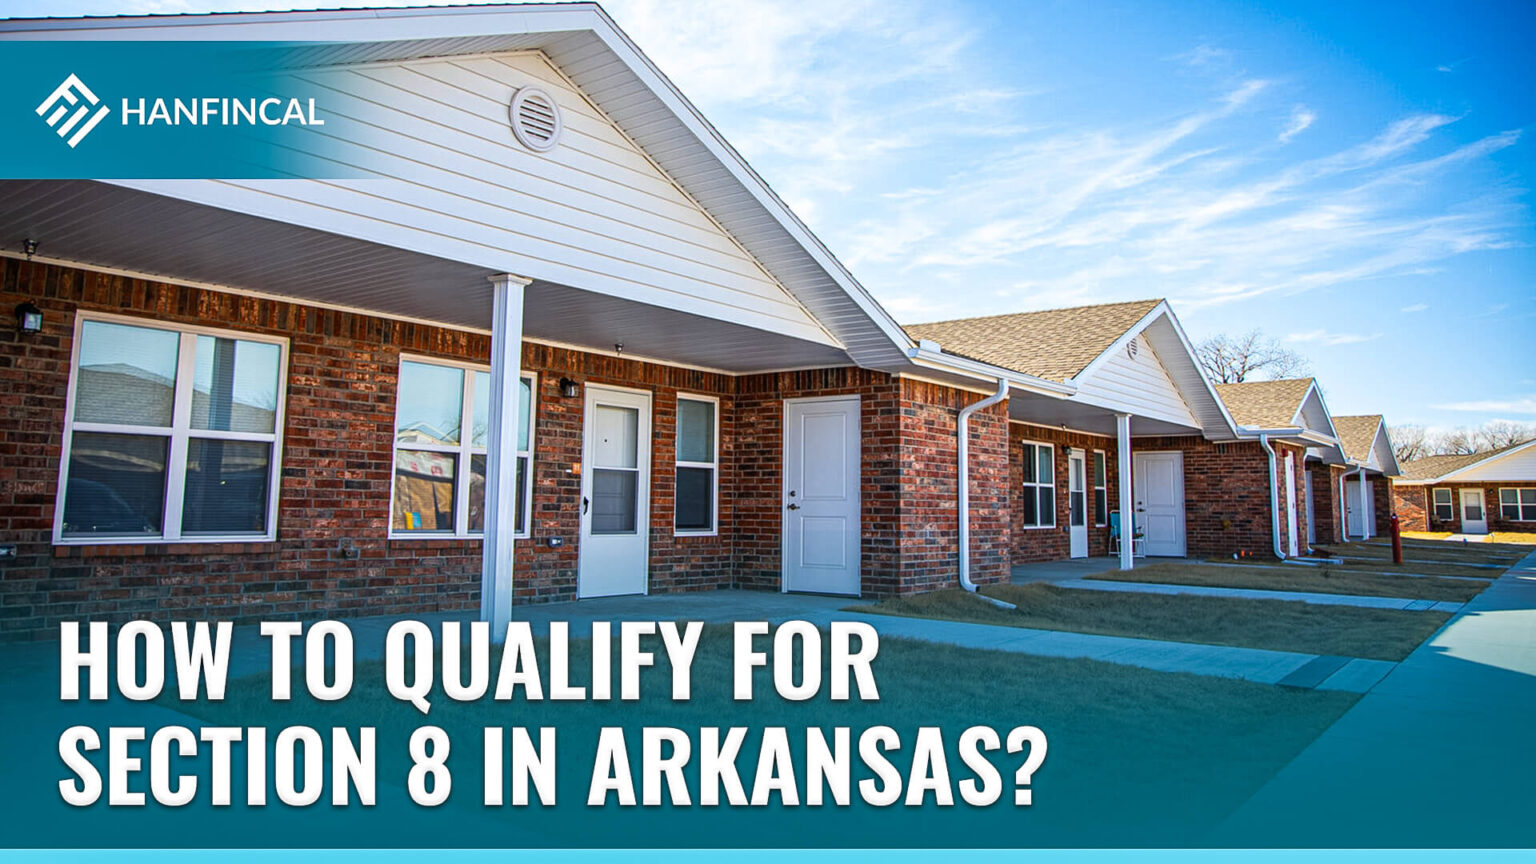 how-to-apply-for-section-8-in-arkansas-02-2023-hanfincal